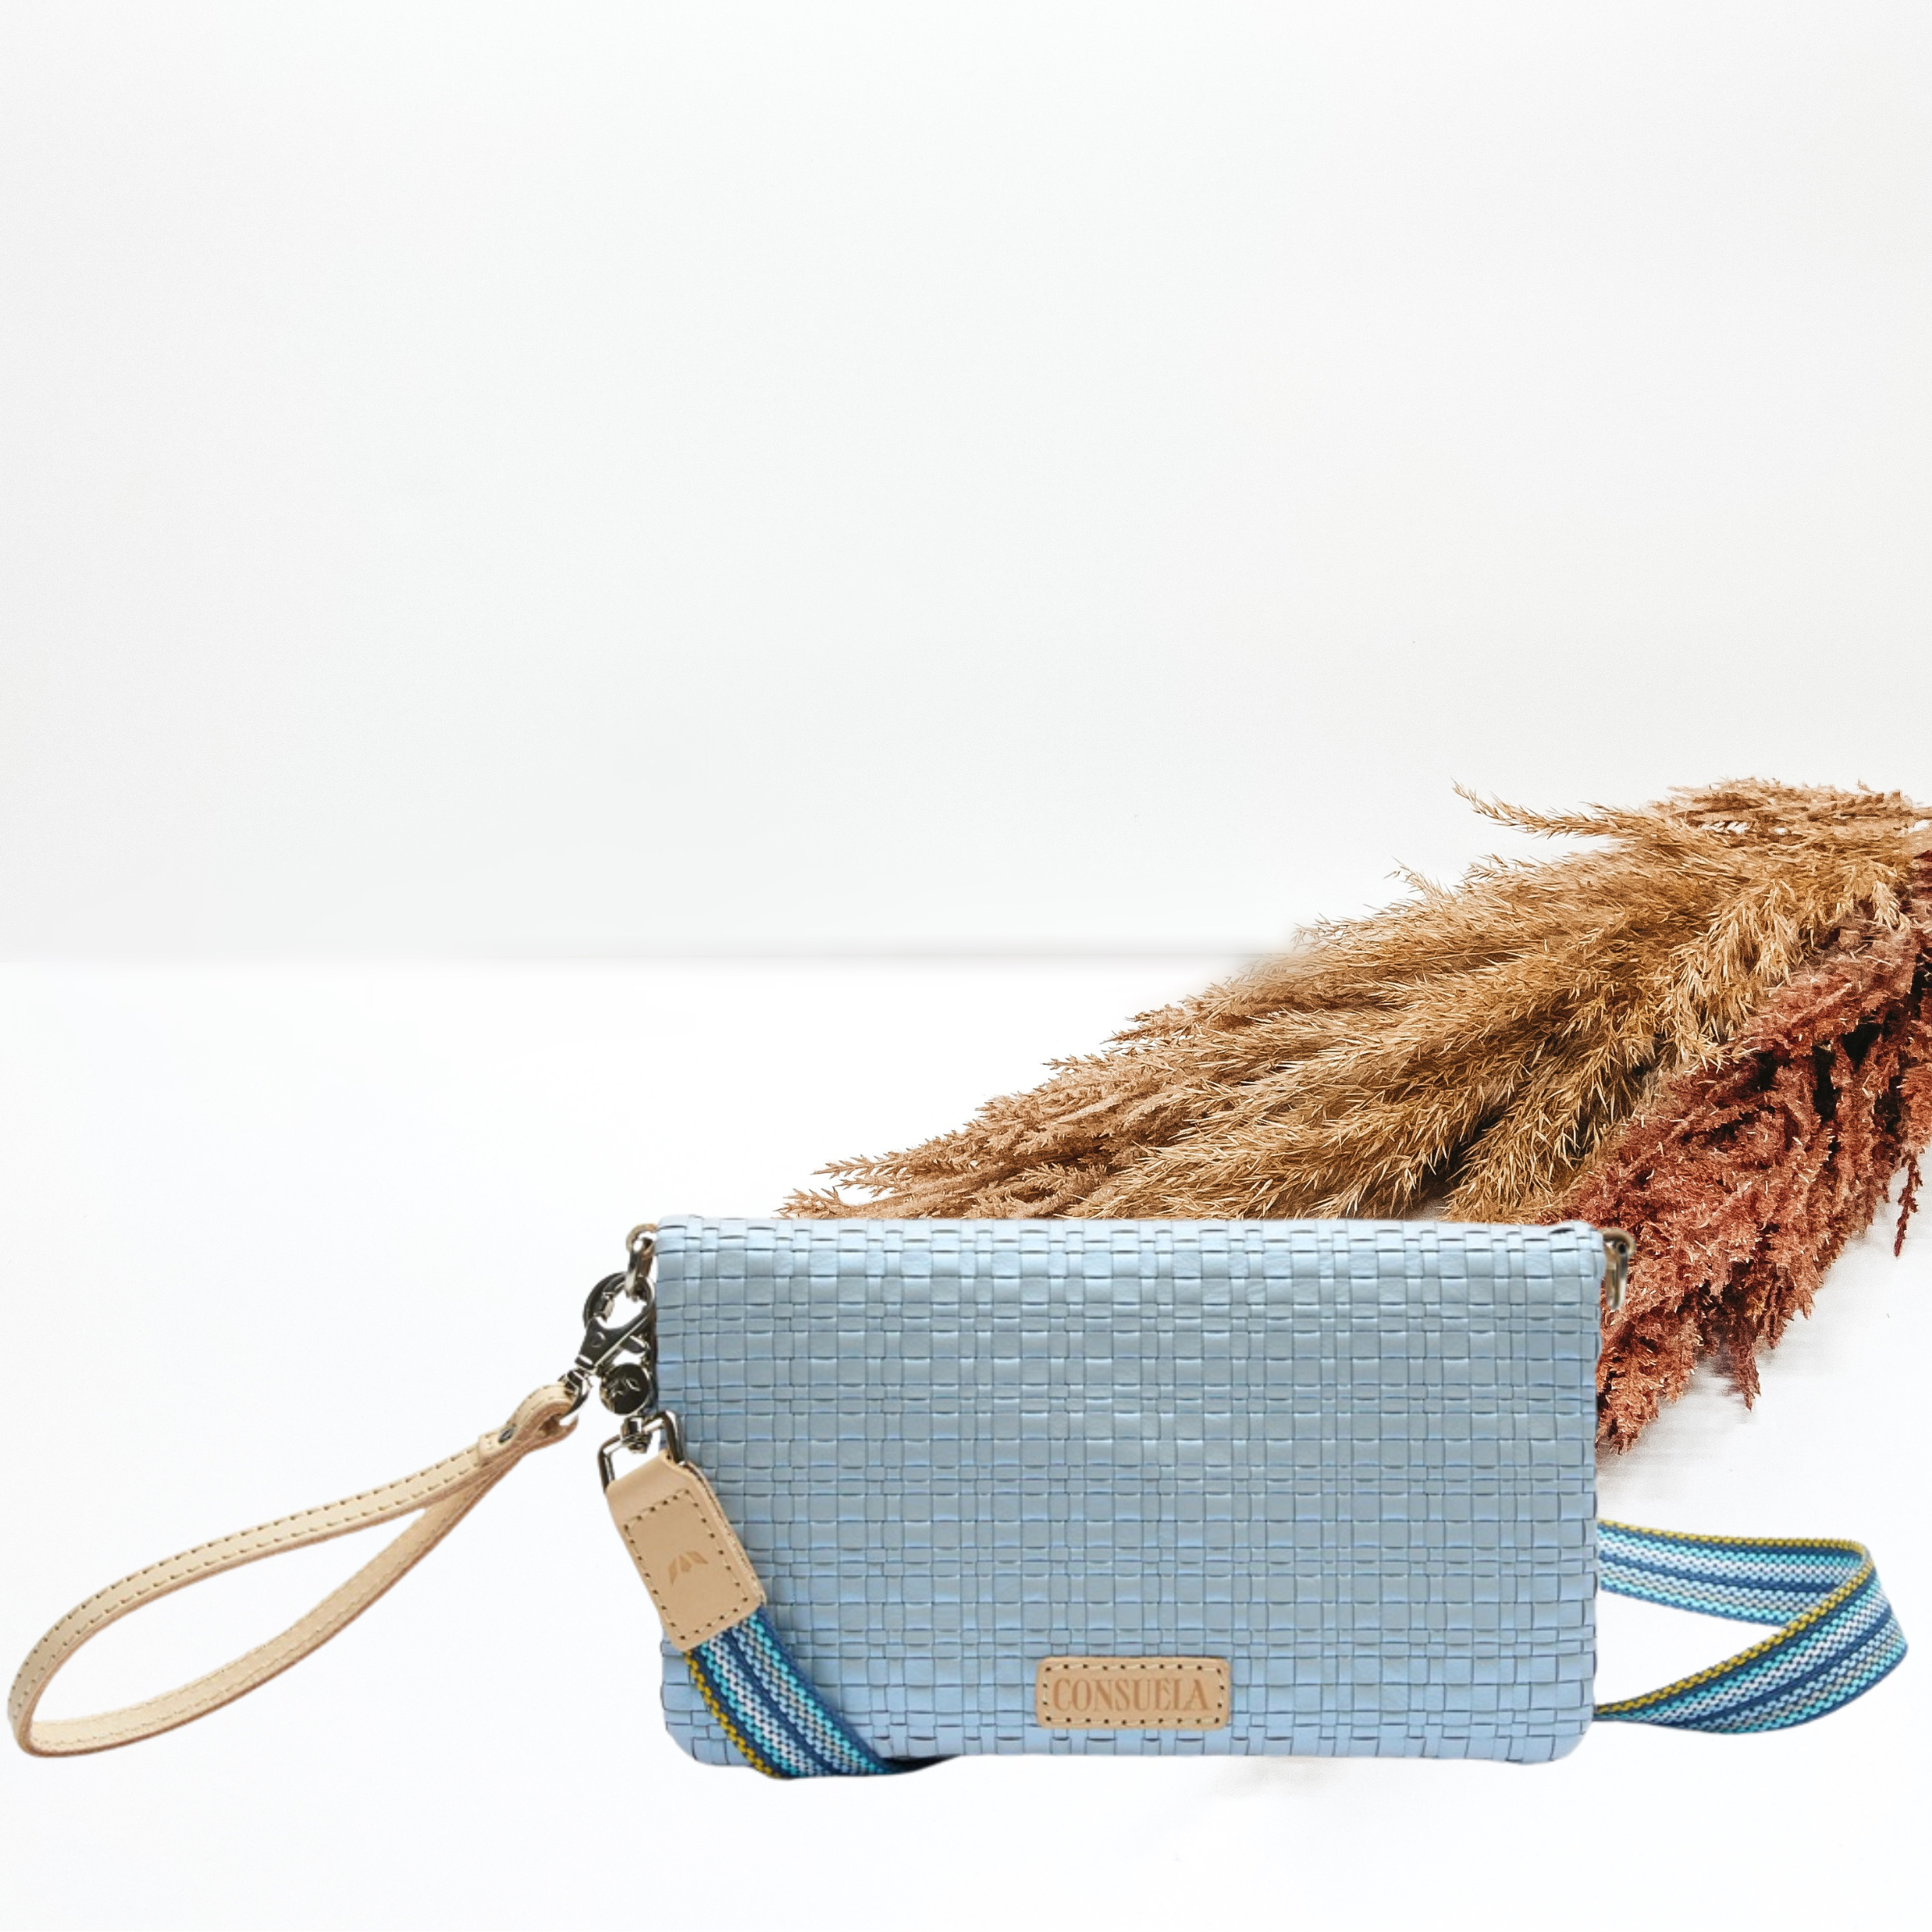 Light blue metallic rectangle purse with a woven pattern. This purse has a light tan wristlet strap and a striped, long purse strap. This pictured on a white background with tan and brown pompous grass in the background.